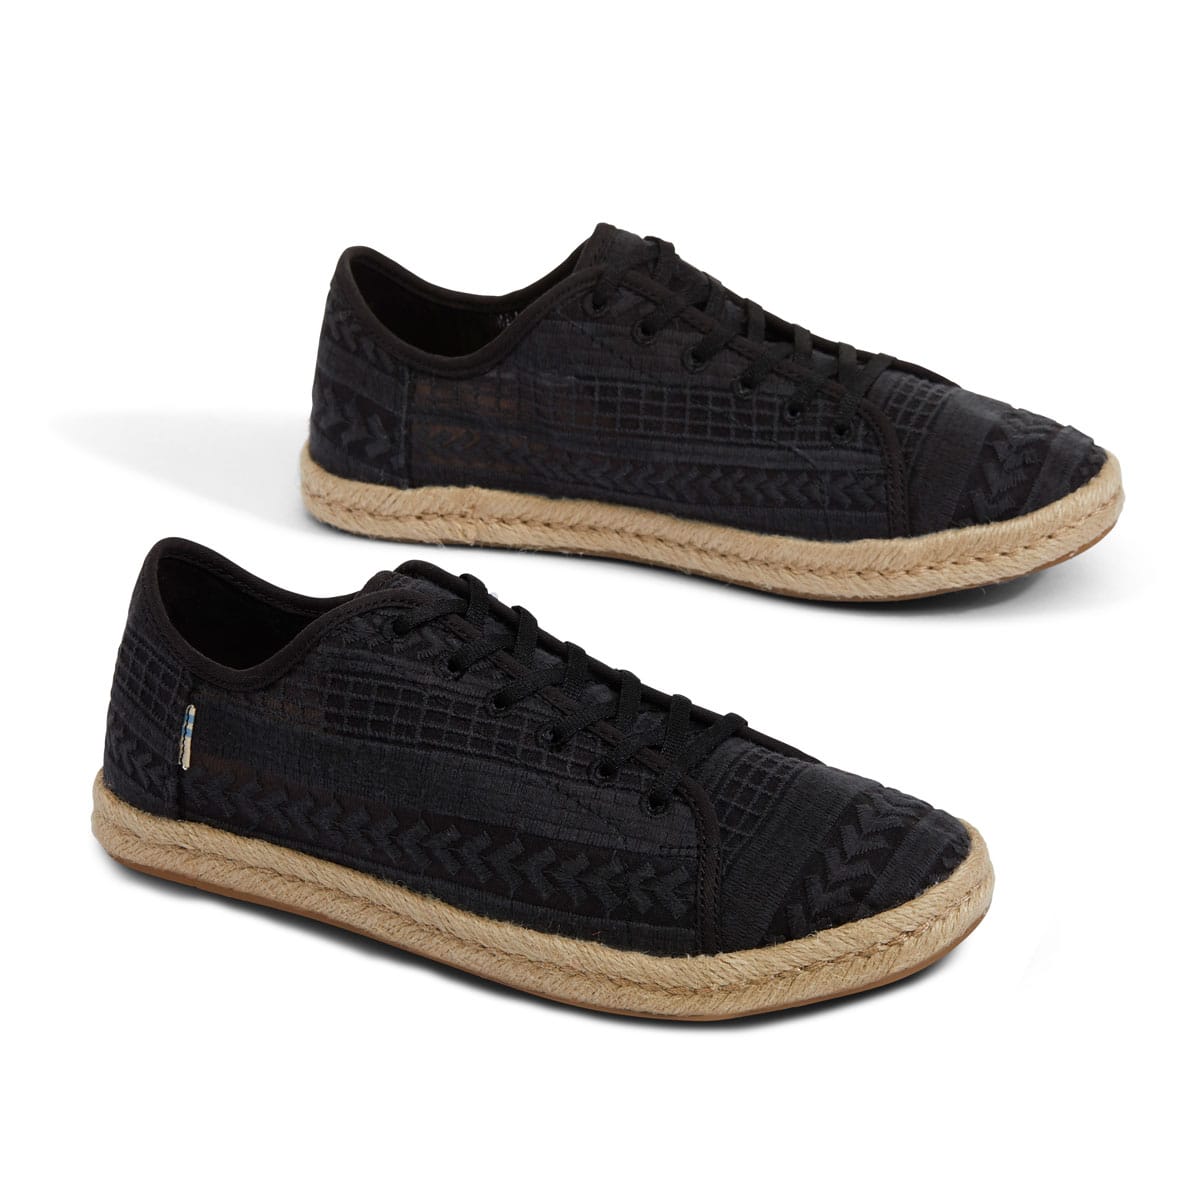 toms black arrow embroidered mesh